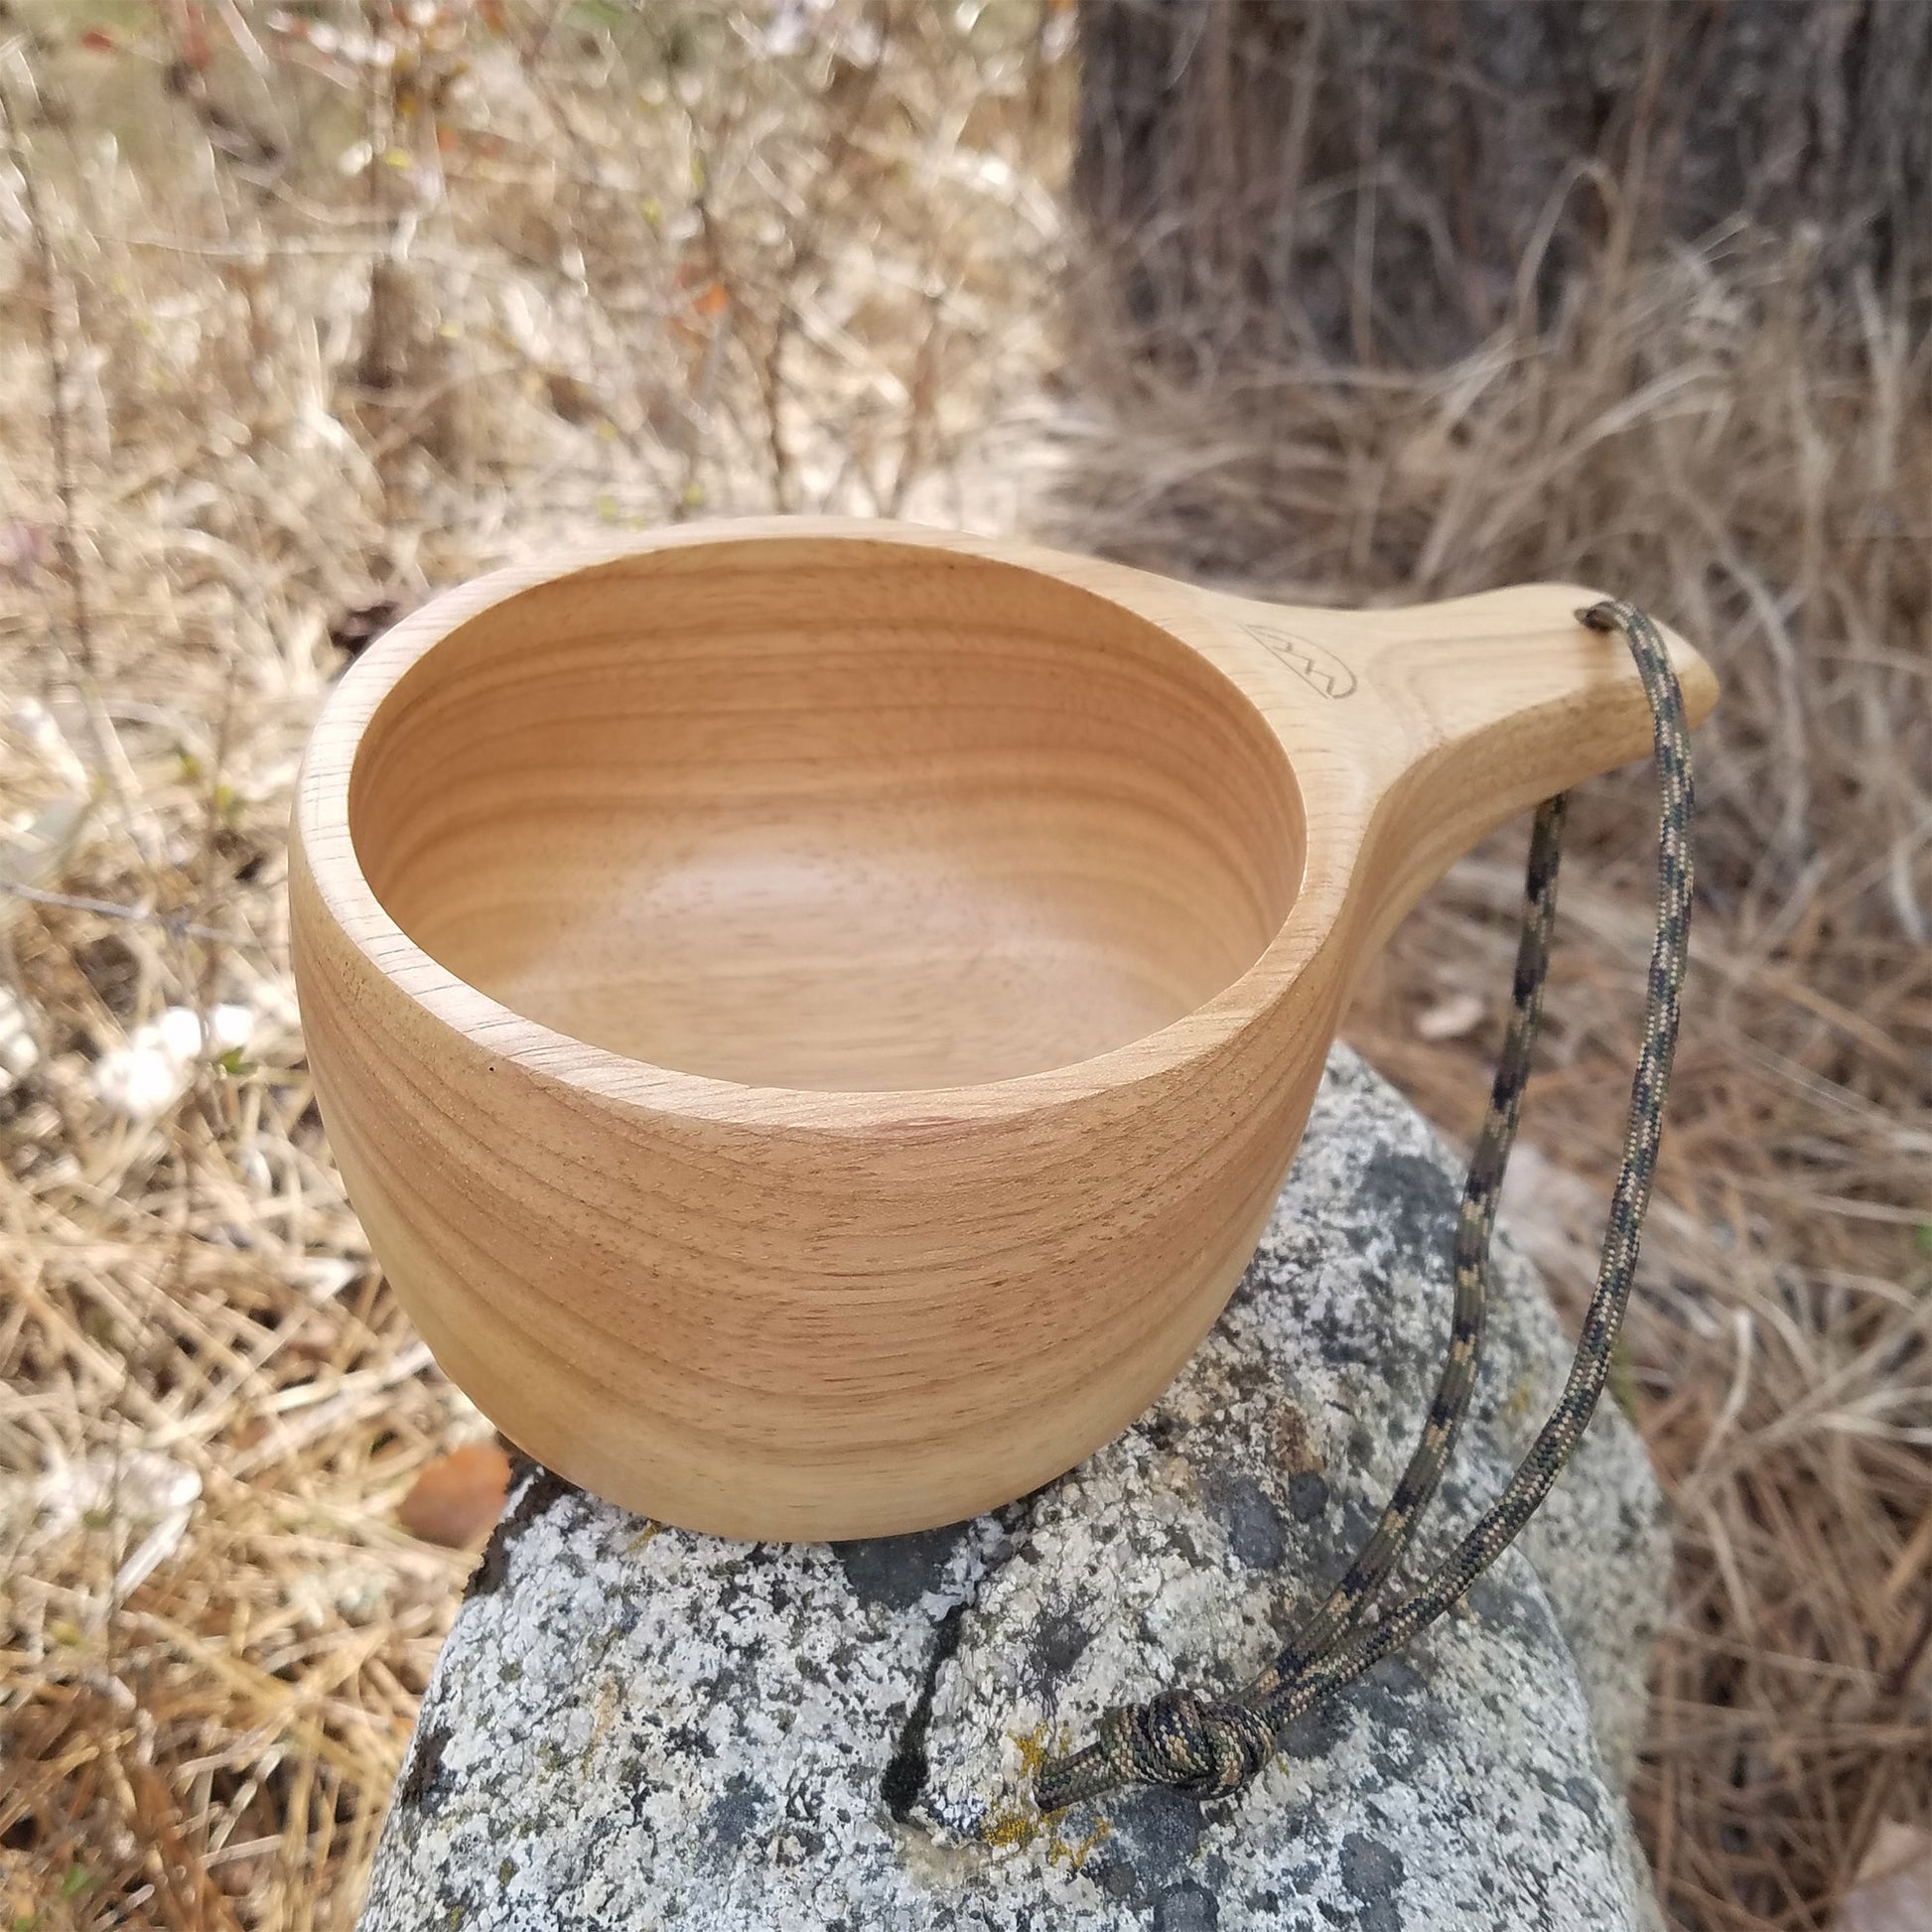 Carving a Kuksa Cup tutorial